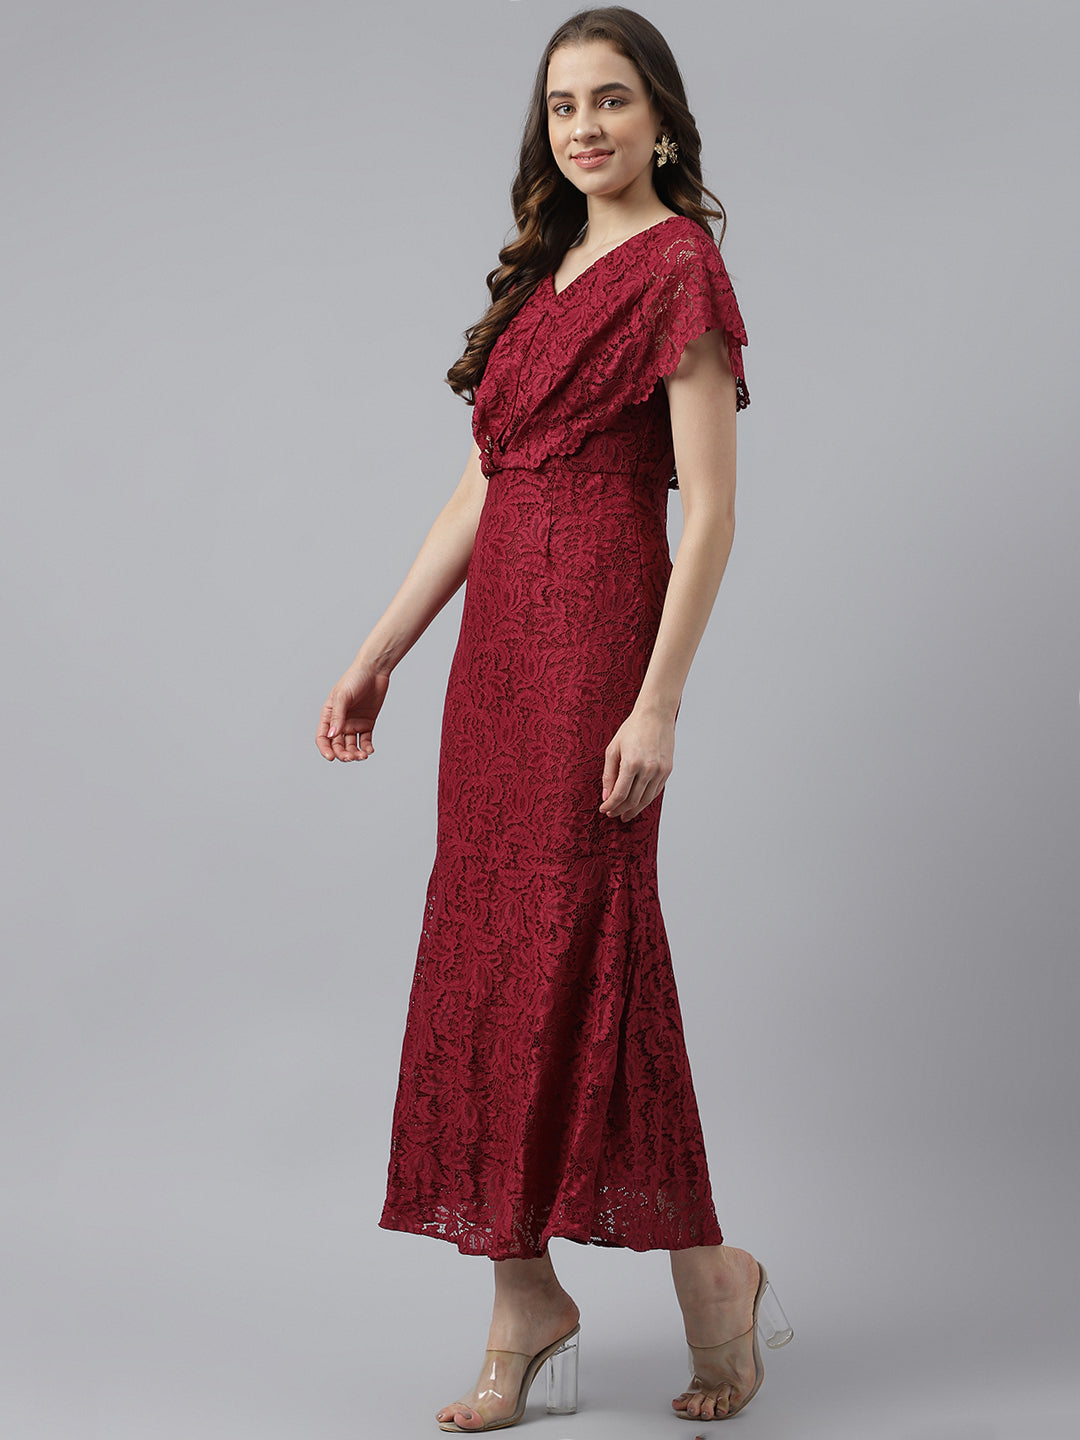 Wine Lace Short Dress with 3/4 Sleeves